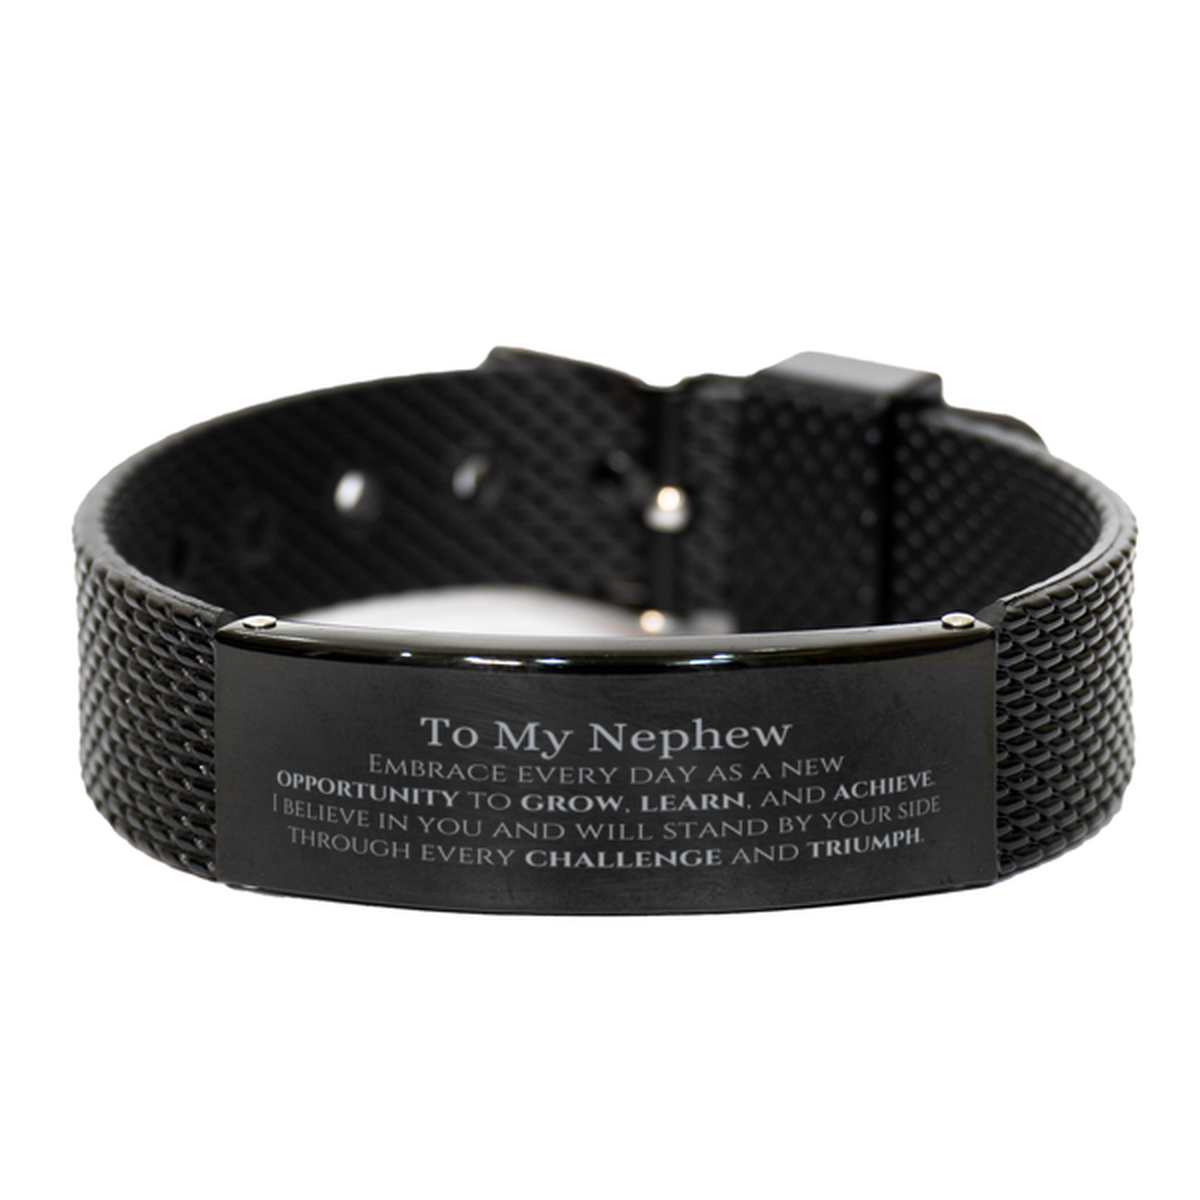 To My Nephew Gifts, I believe in you and will stand by your side, Inspirational Black Shark Mesh Bracelet For Nephew, Birthday Christmas Motivational Nephew Gifts